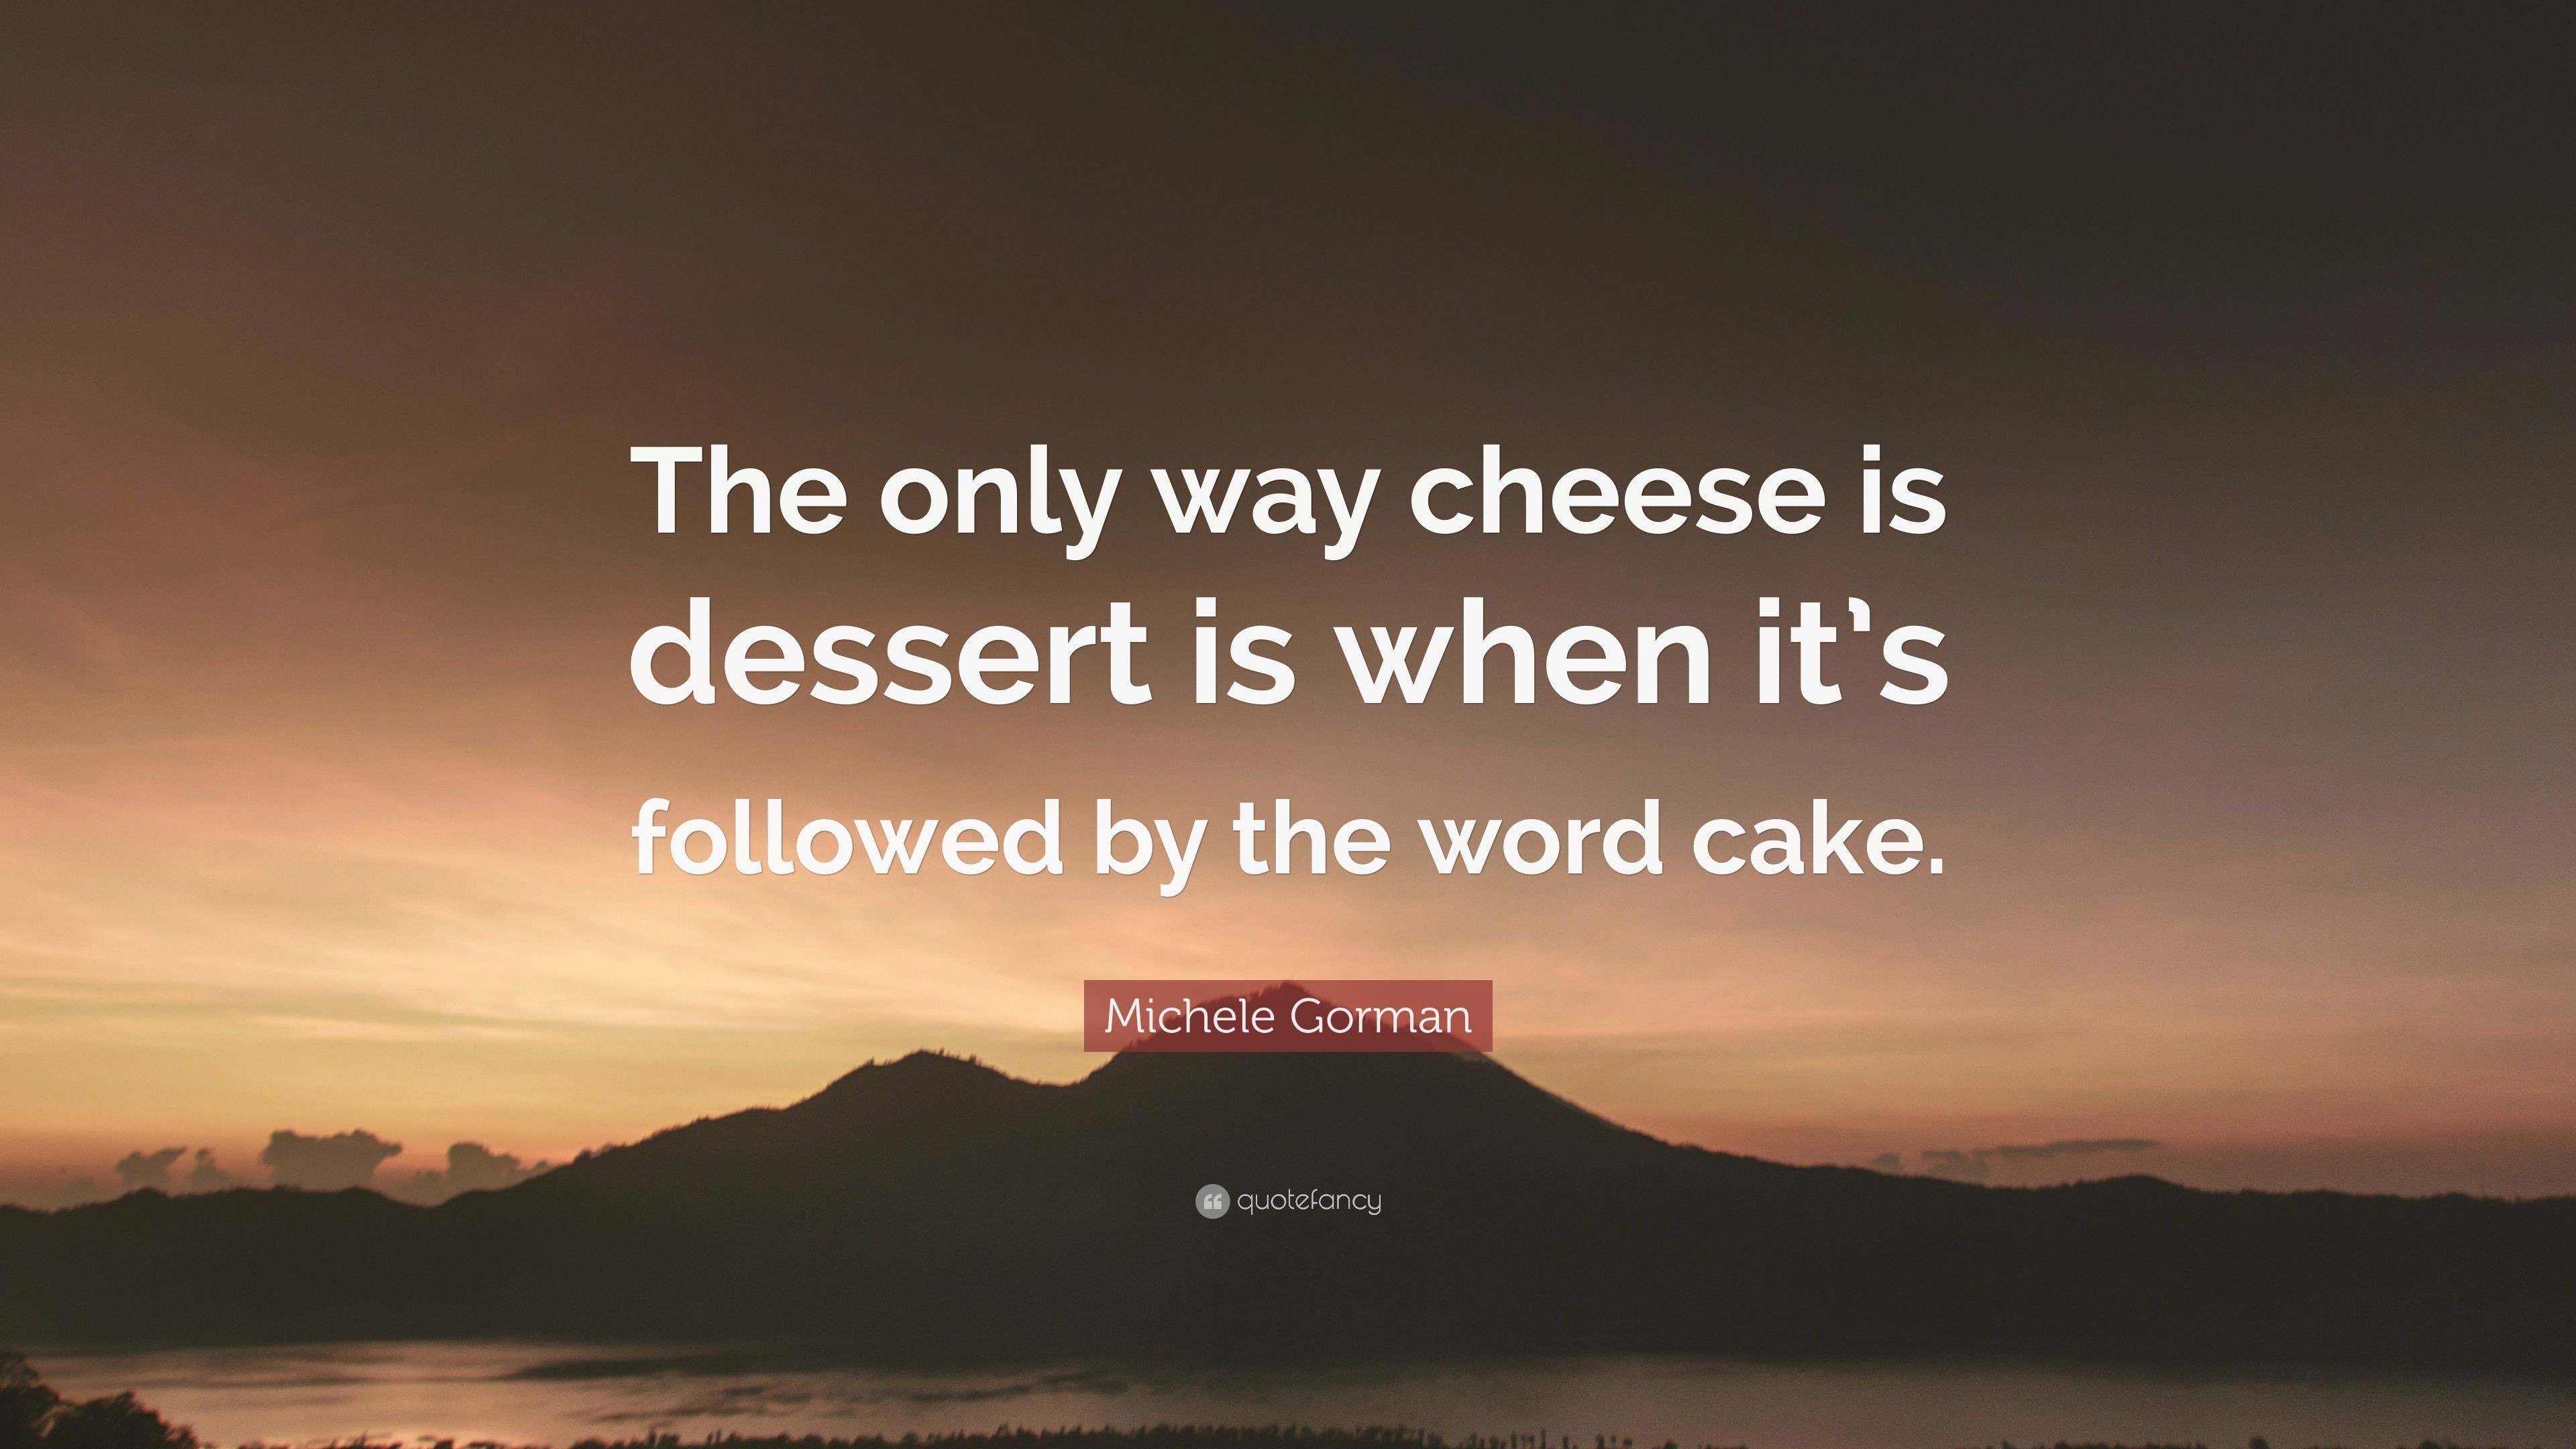 3840x2160 Michele Gorman Quote: “The only way cheese is dessert is when it's followed  by